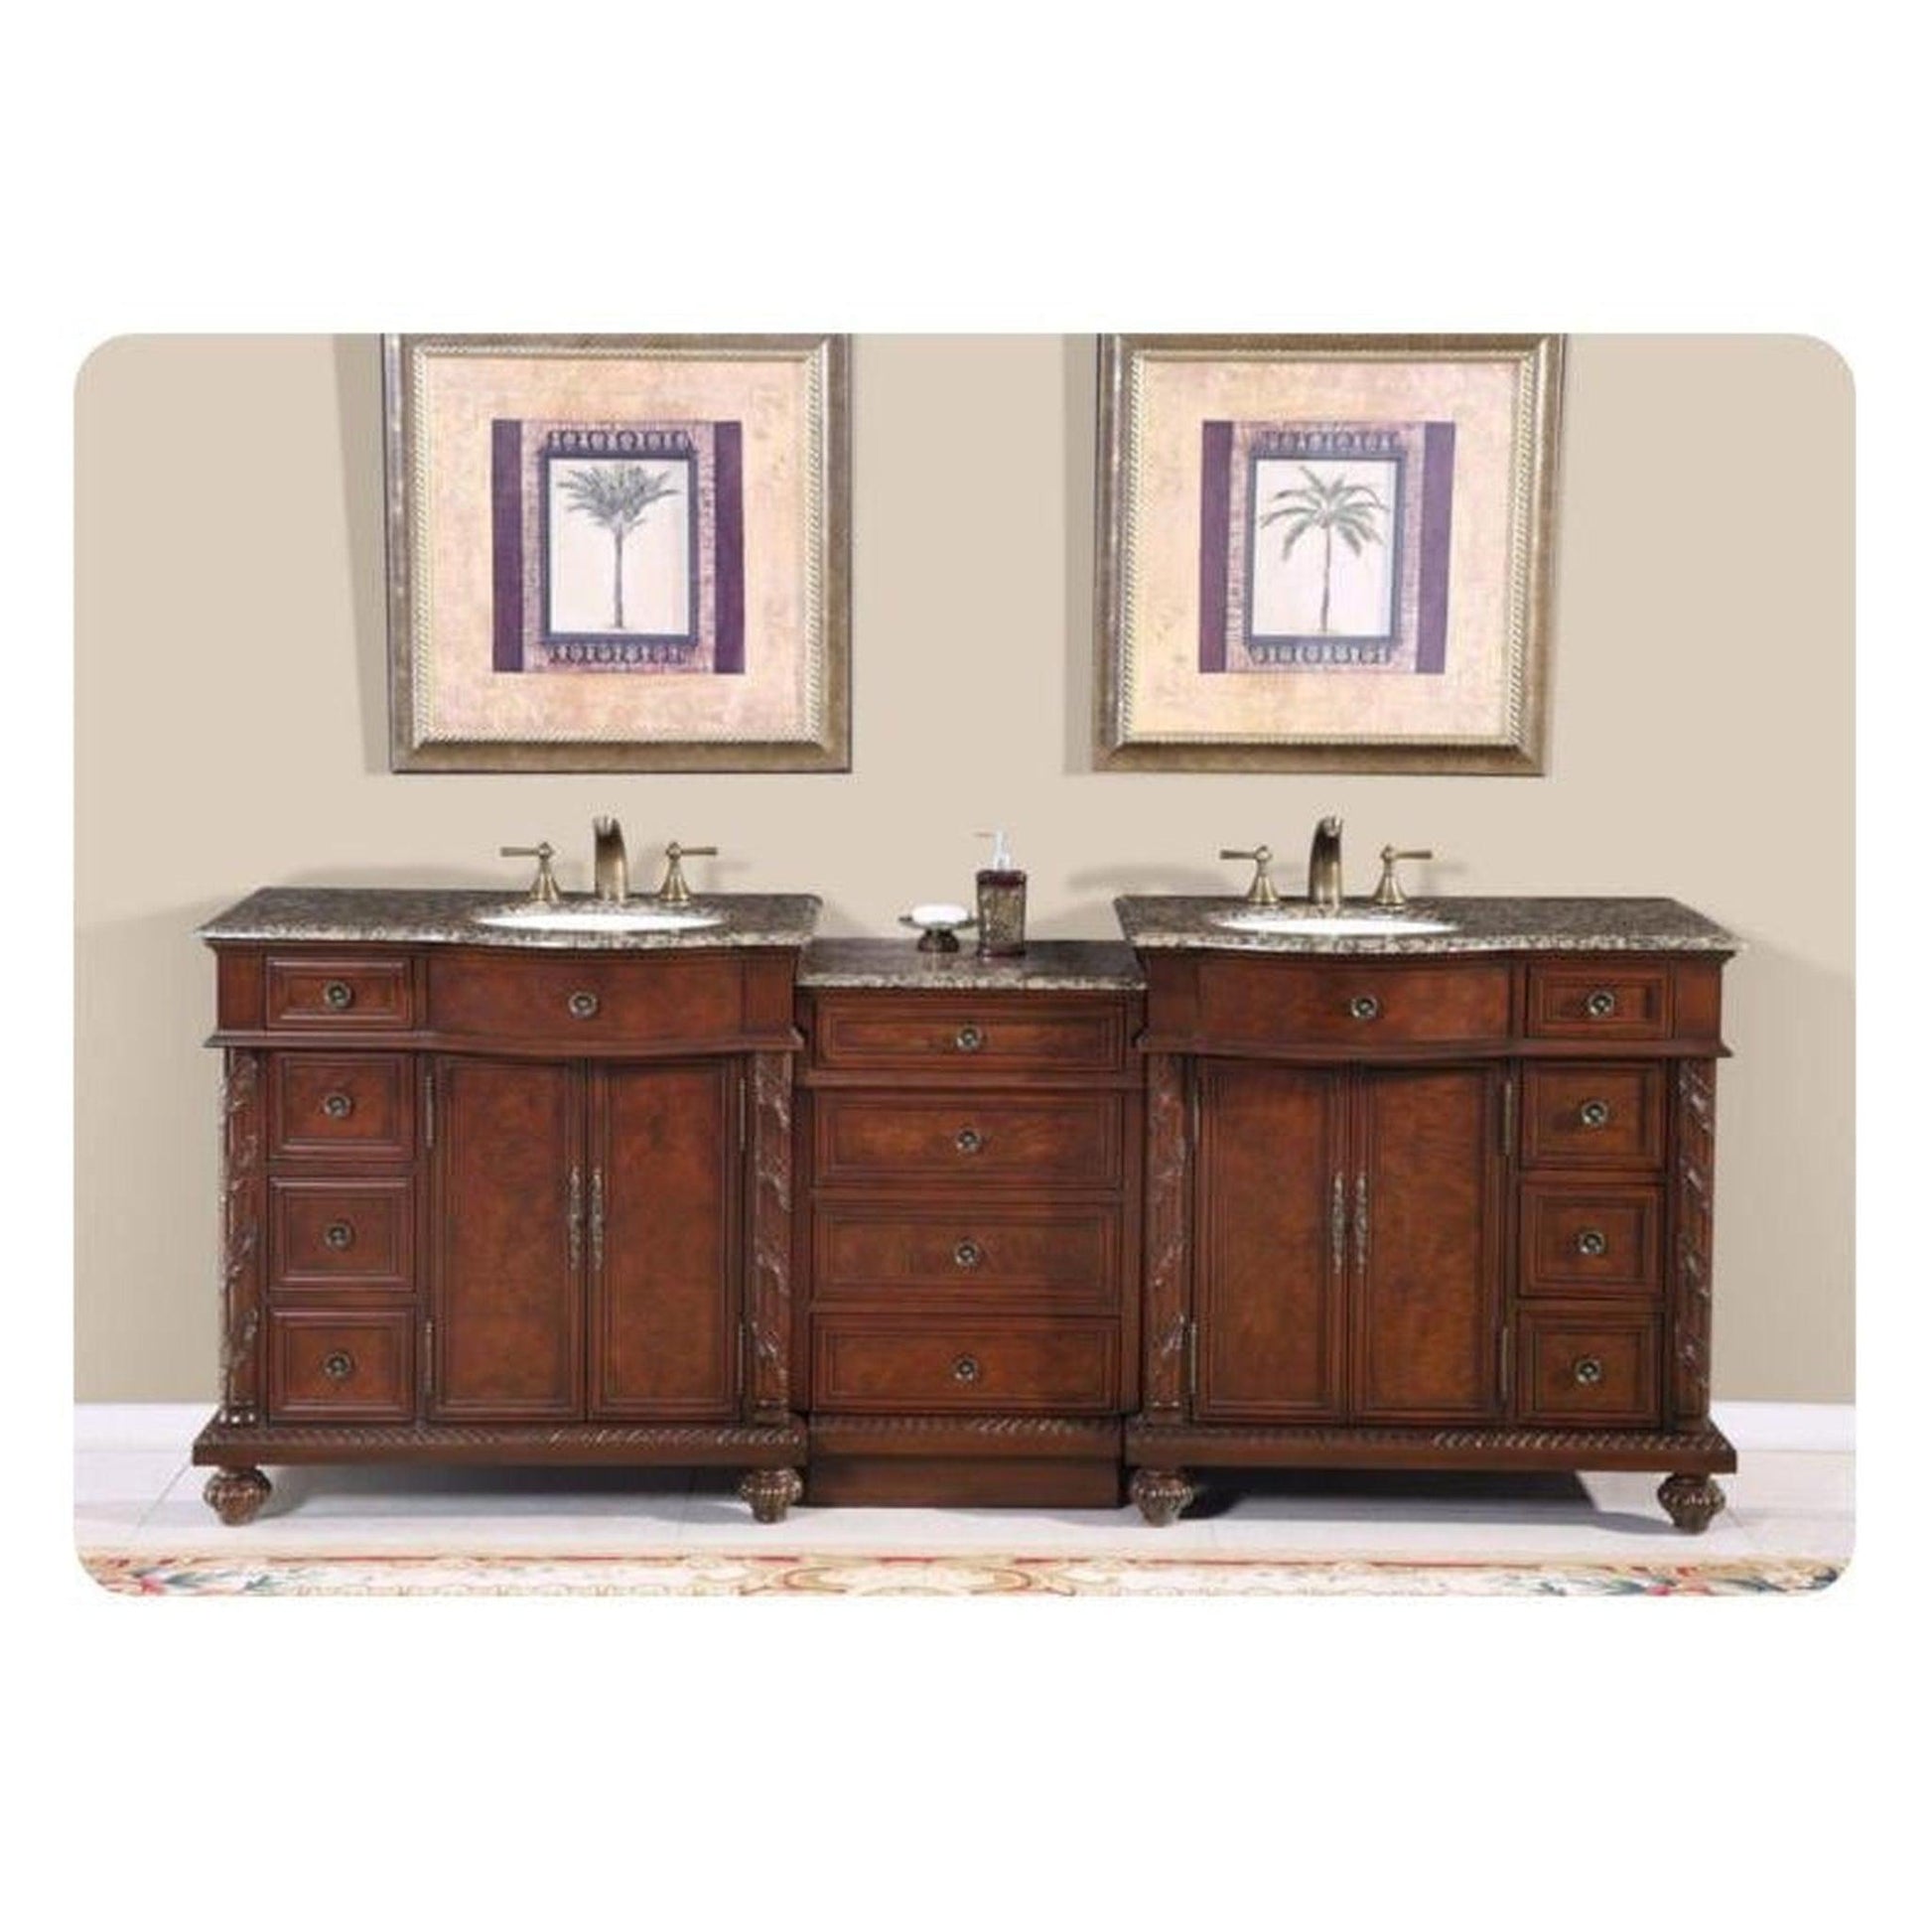 Silkroad Exclusive 90" Double Sink English Chestnut Modular Bathroom Vanity With Baltic Brown Granite Countertop, White Ceramic Undermount Sink and Drawer Bank Cabinet